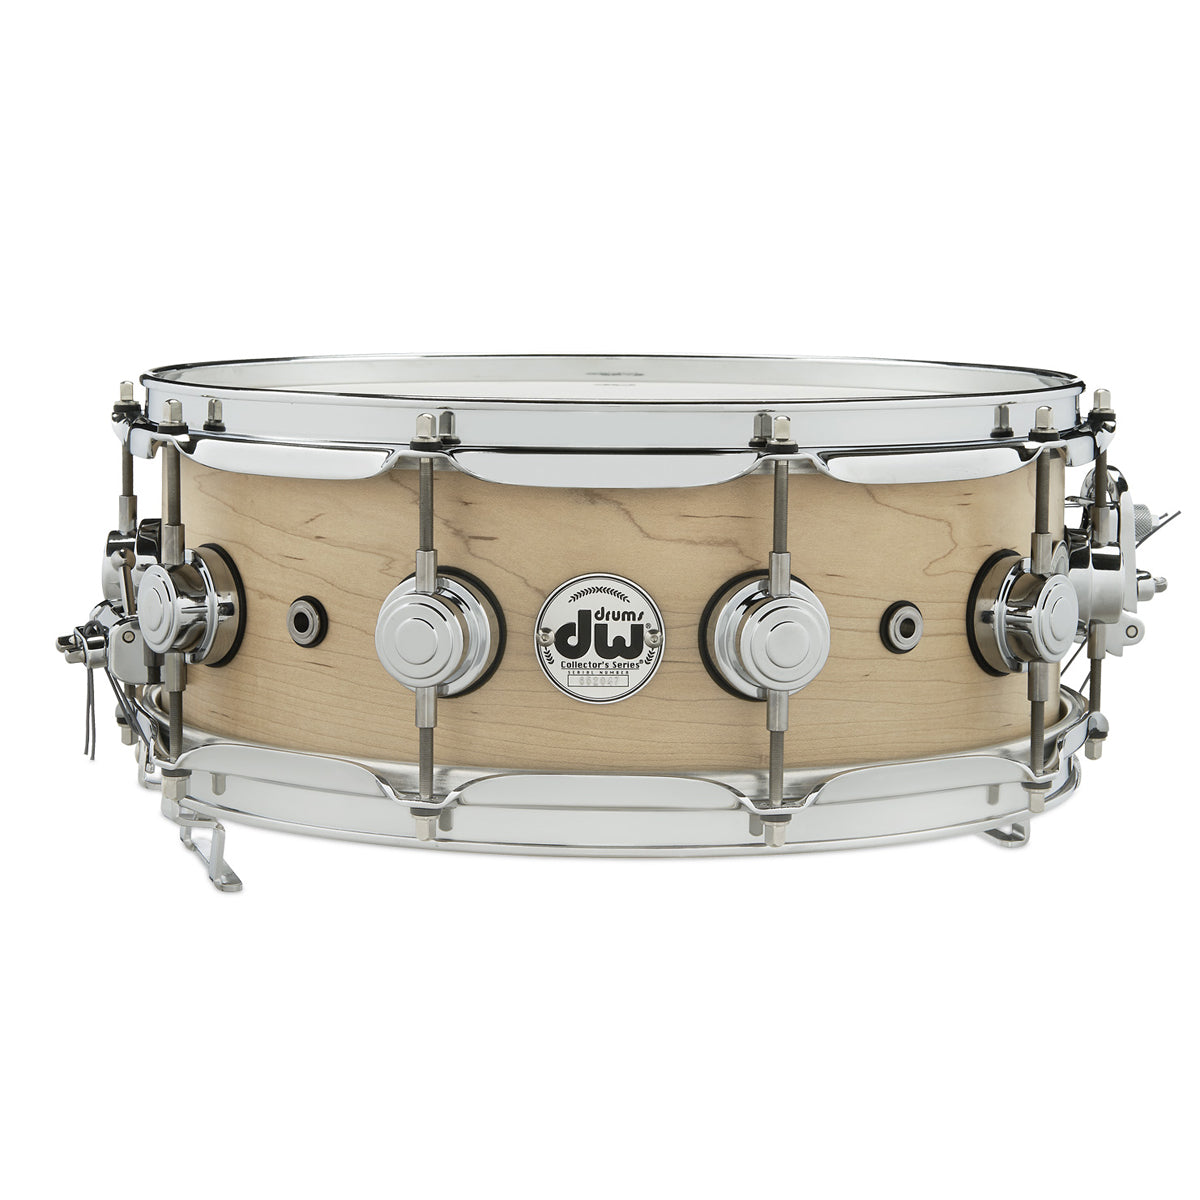 DW Collector's Series 14"x5.5" Solid Maple Super-Sonic Snare